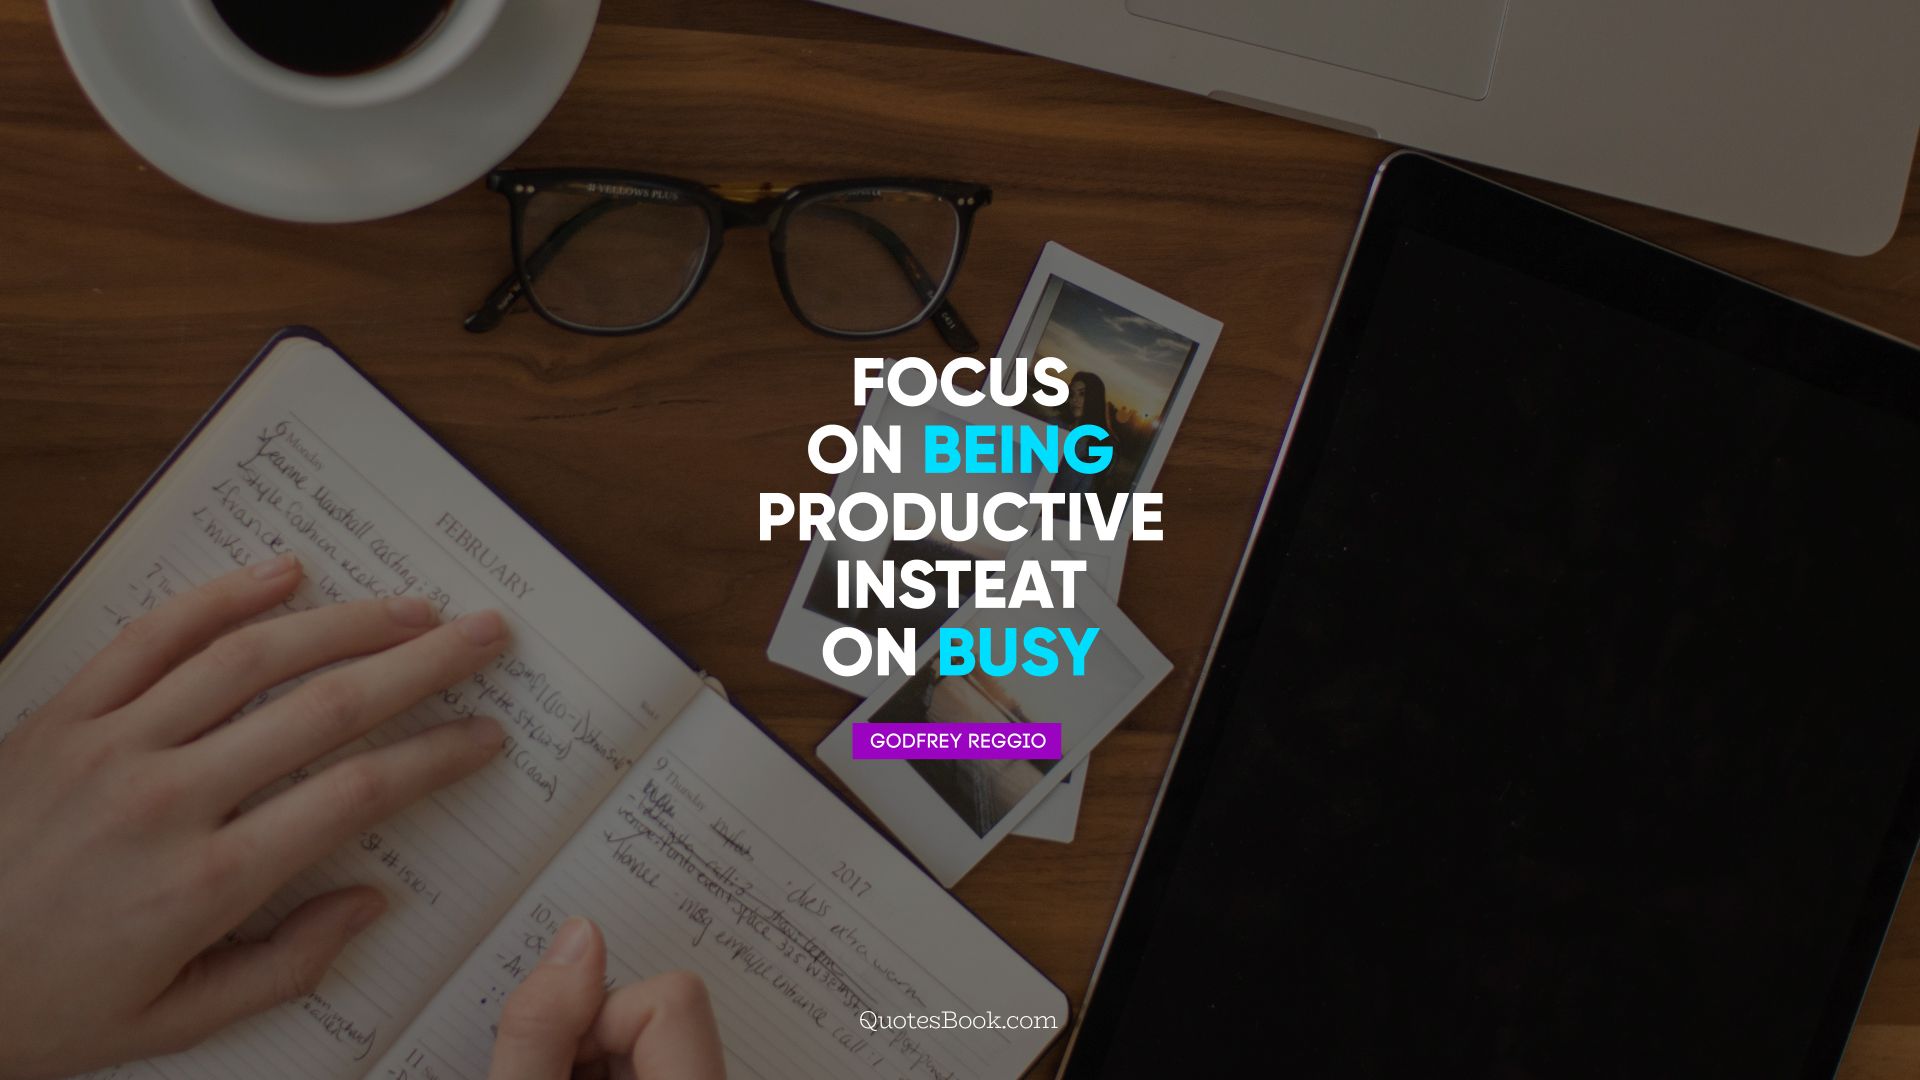 Focus on being productive instead of busy. - Quote by Godfrey Reggio